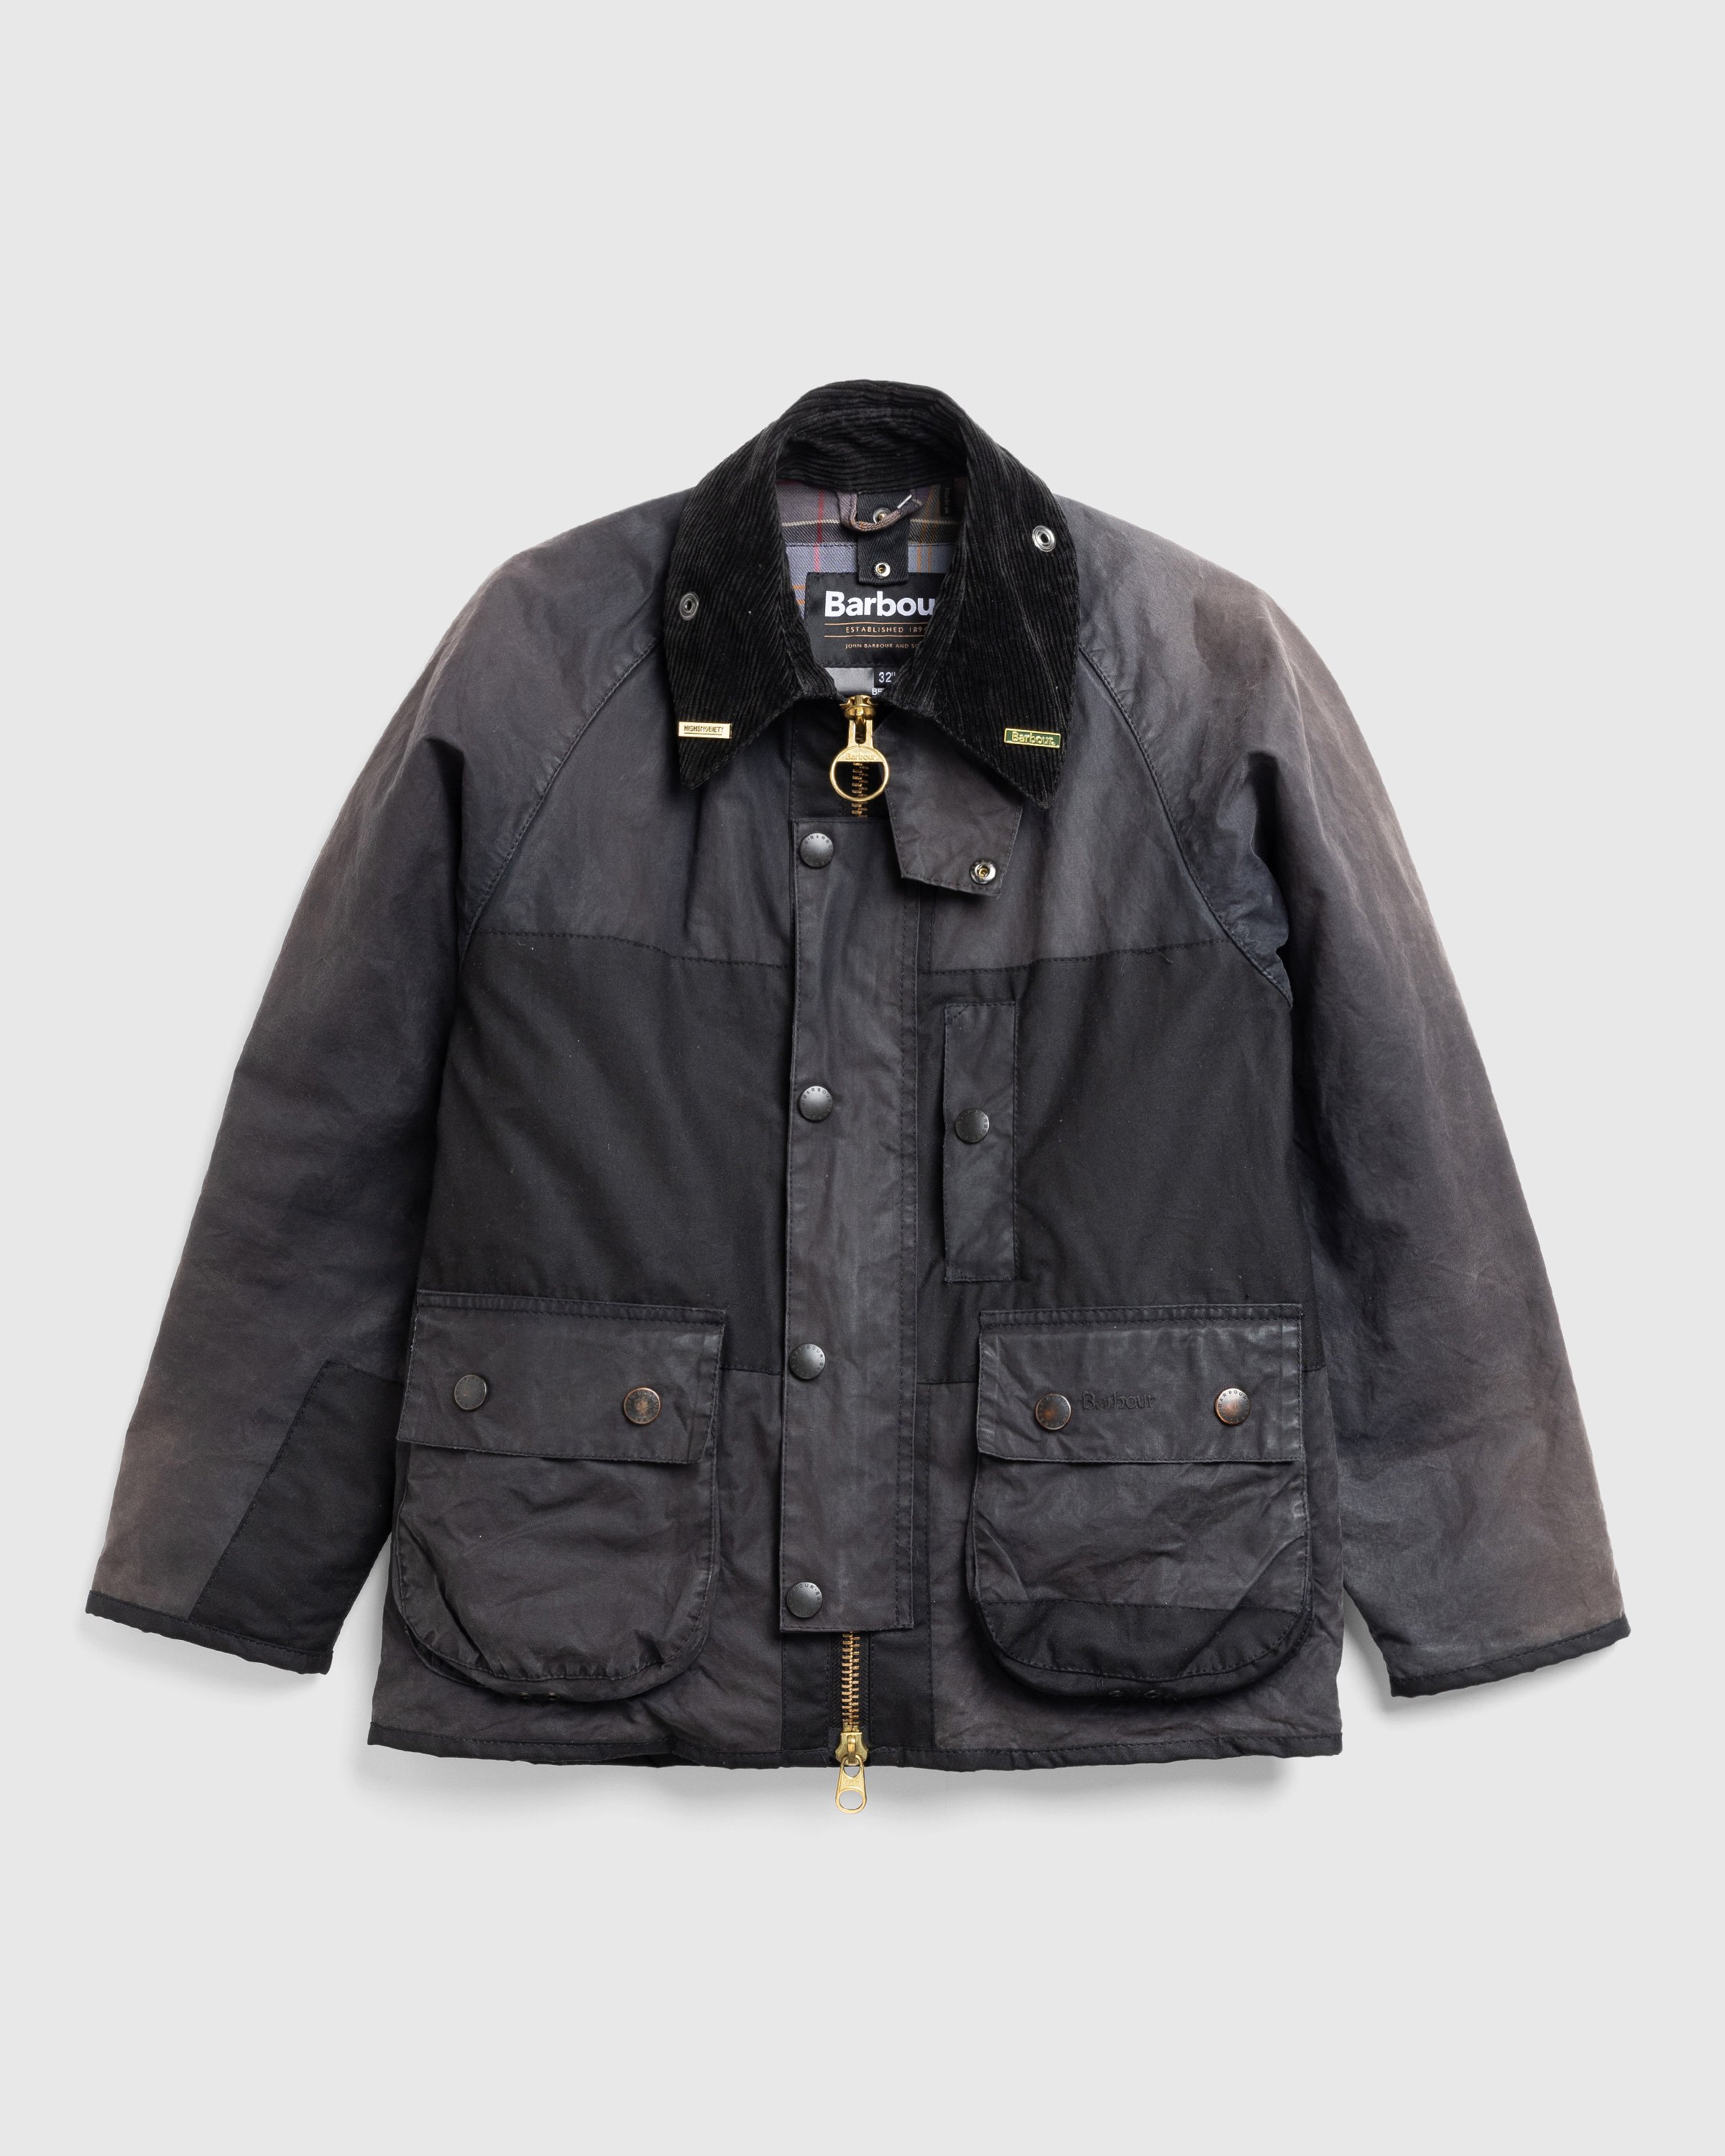 Barbour x Highsnobiety - Re-Loved Cropped Bedale Jacket 1 - 32 - Grey-Black - Clothing - Grey - Image 1